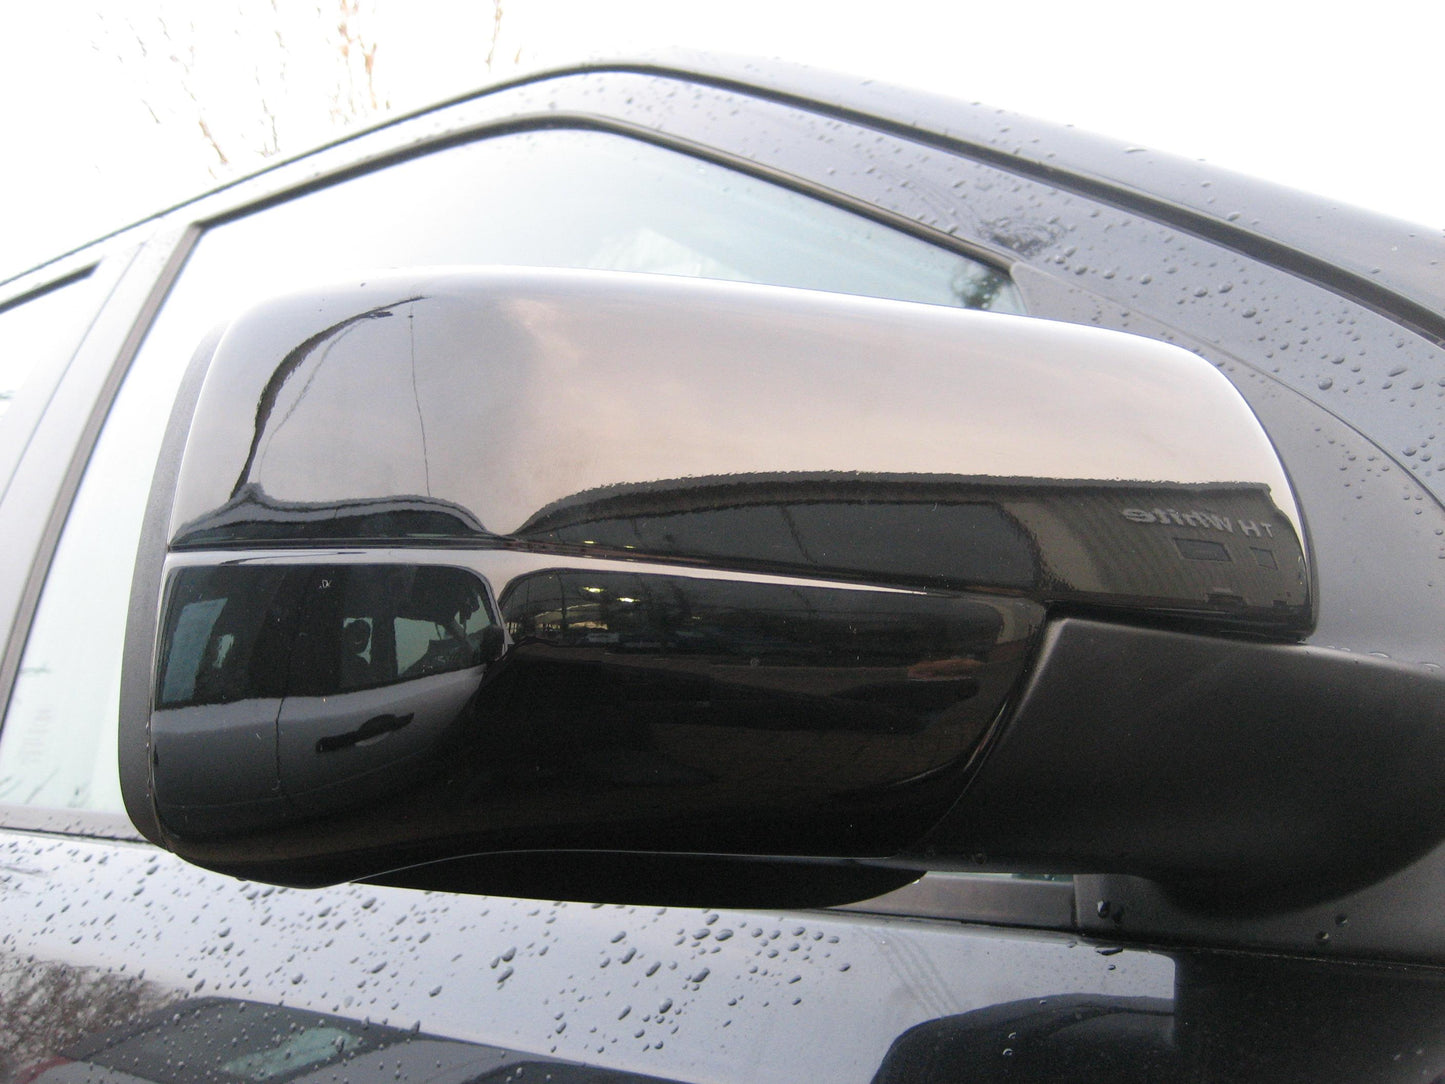 Full Mirror Covers for Land Rover Discovery 3 - Santorini Black